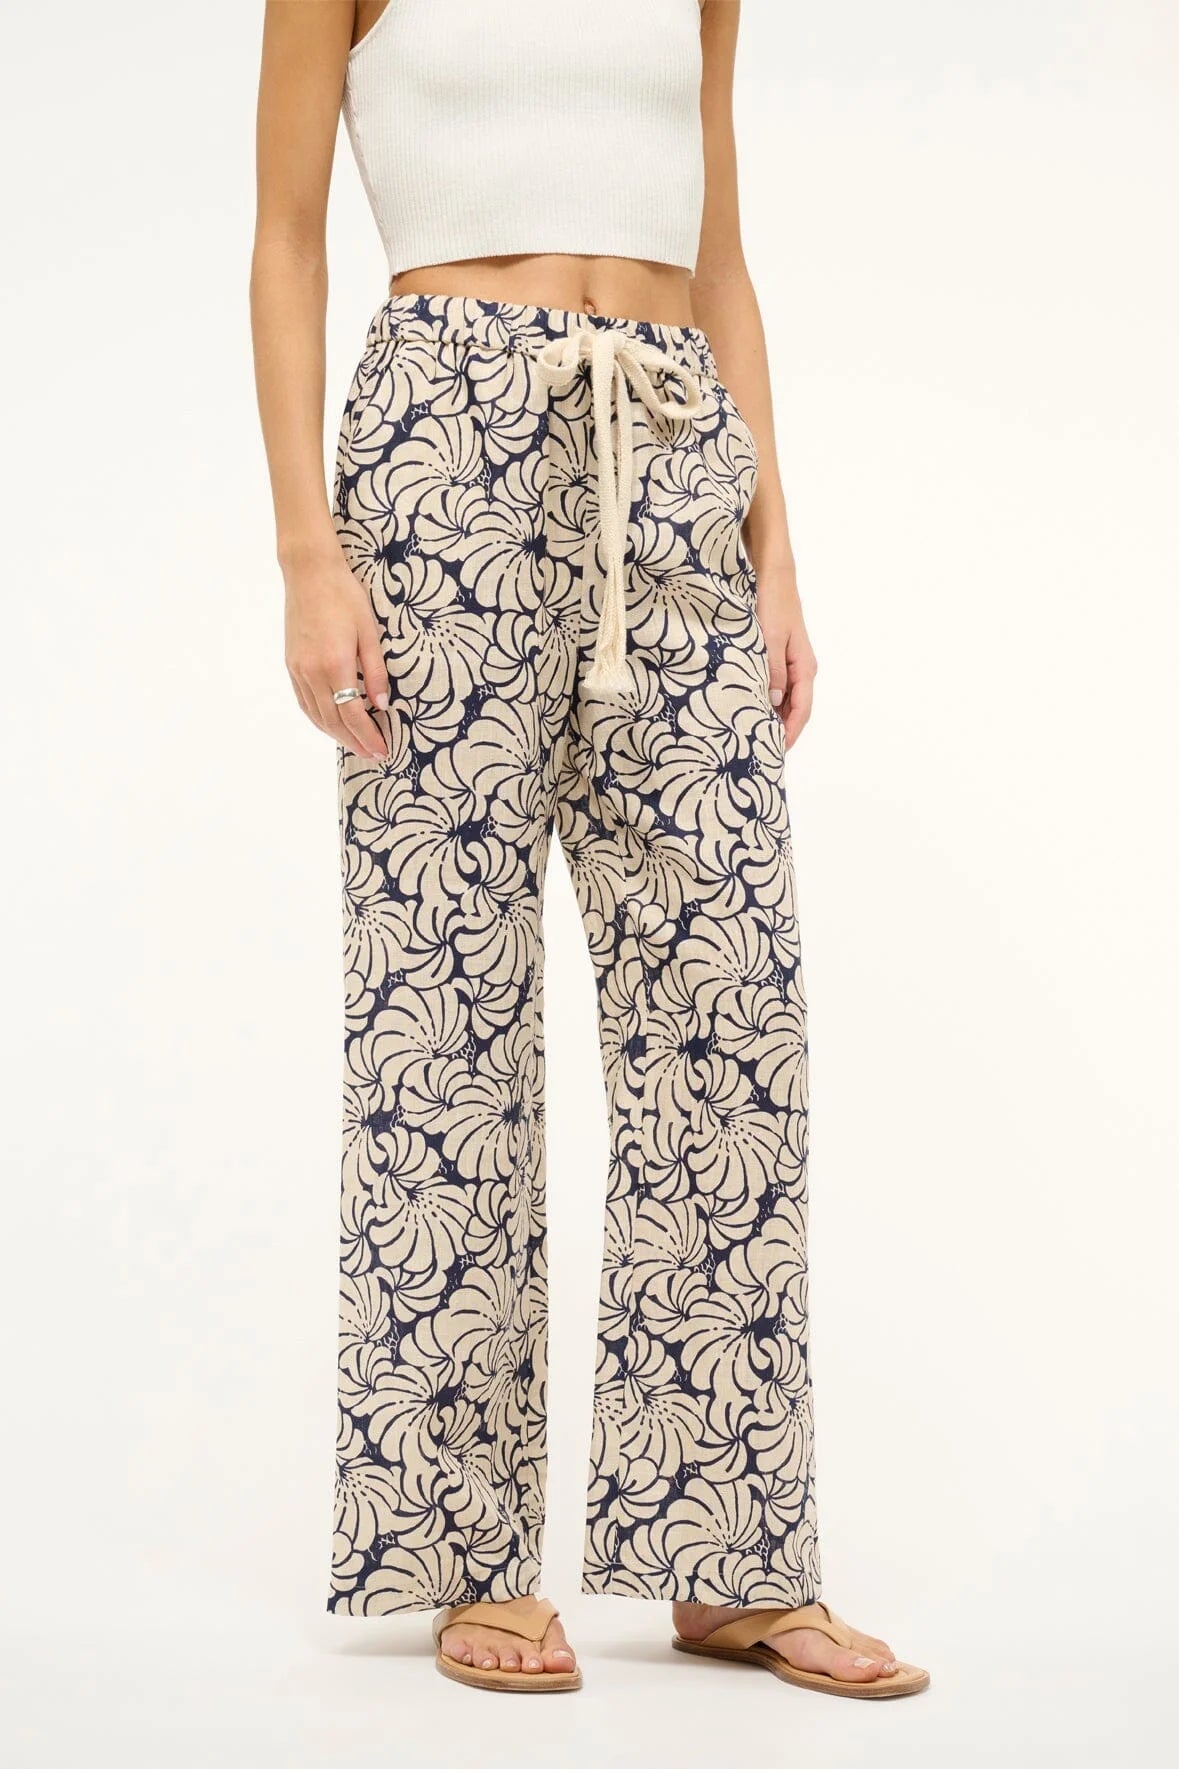 Alize Pant in Navy Scallop Block Print